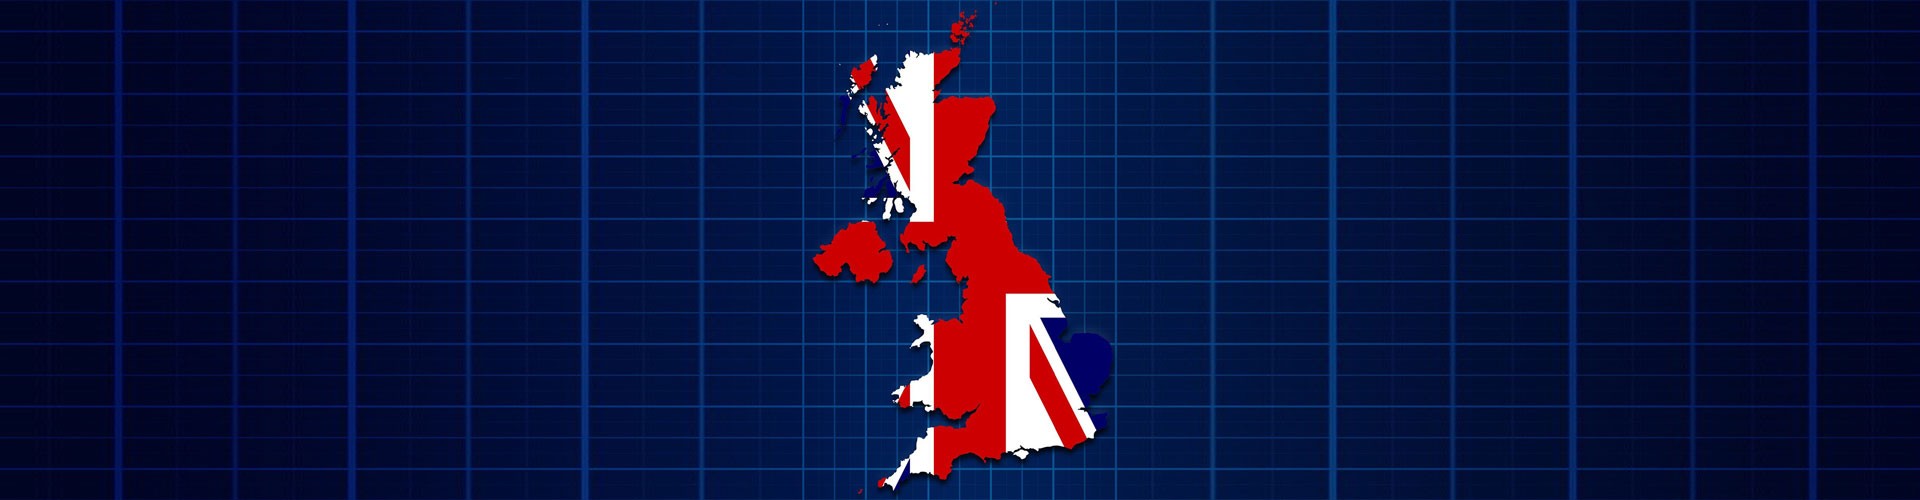 map of UK with union flag superimposed